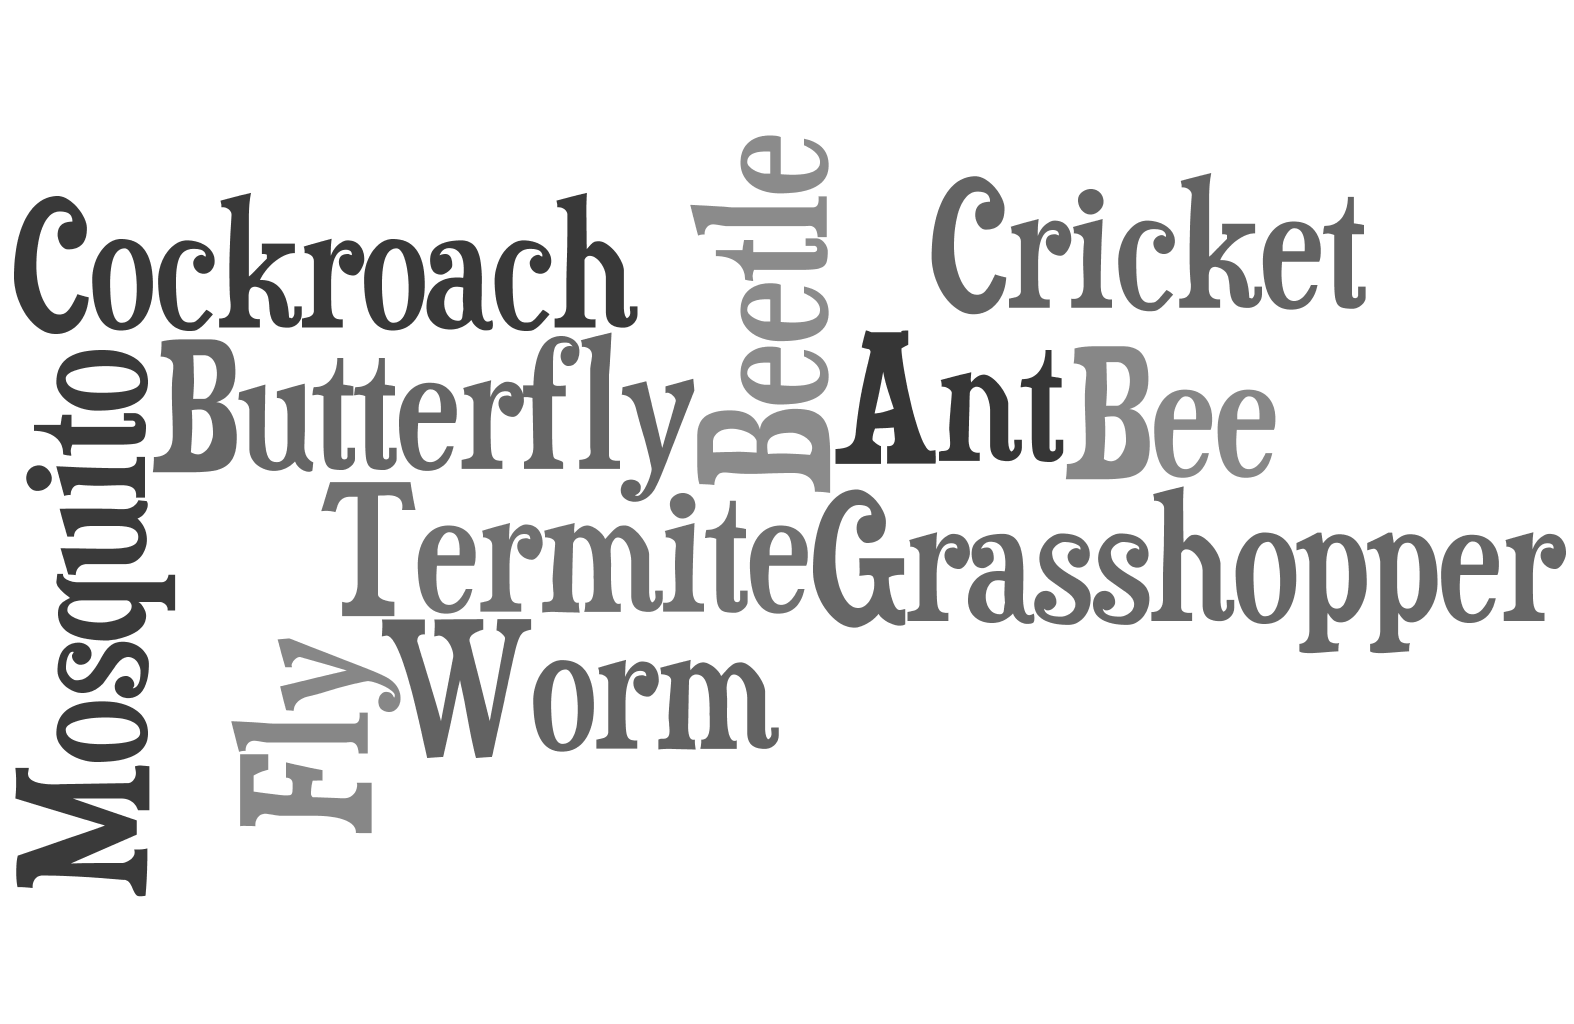 img/word_cloud_questions_3/insect_2.png